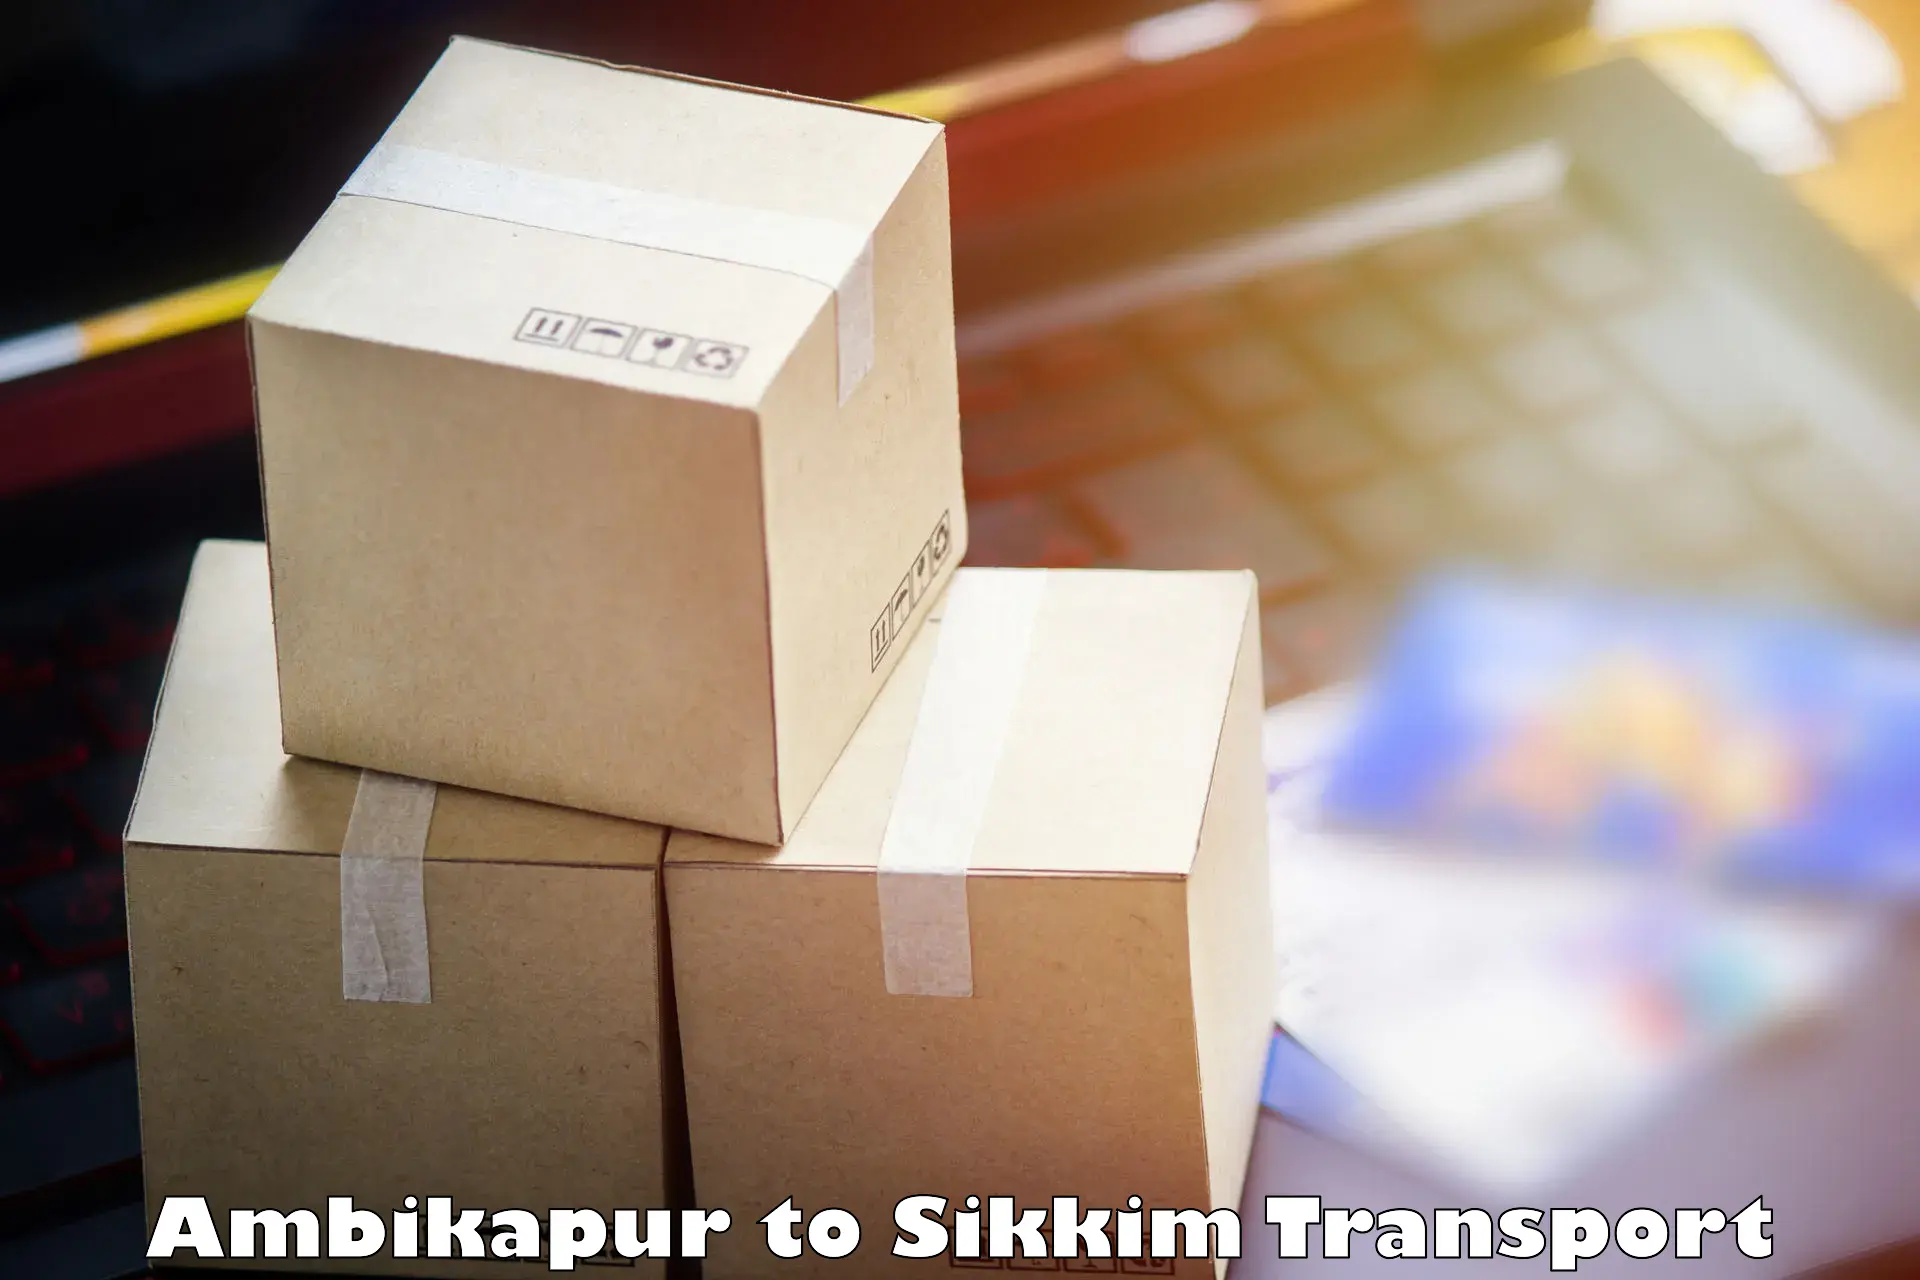 Vehicle parcel service Ambikapur to South Sikkim